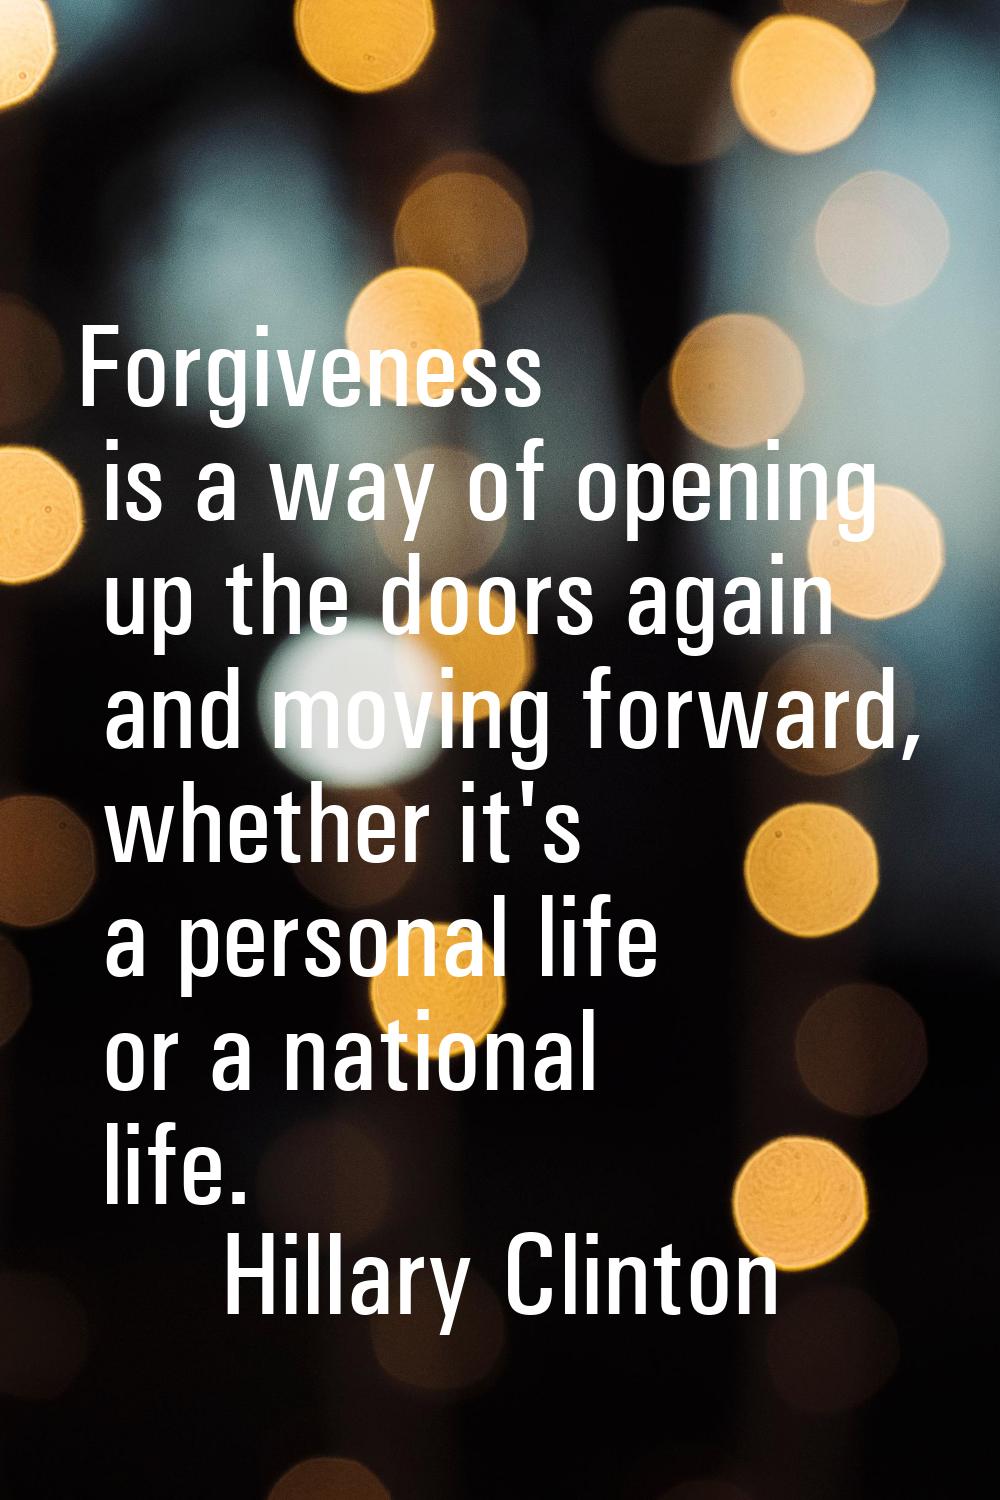 Forgiveness is a way of opening up the doors again and moving forward, whether it's a personal life